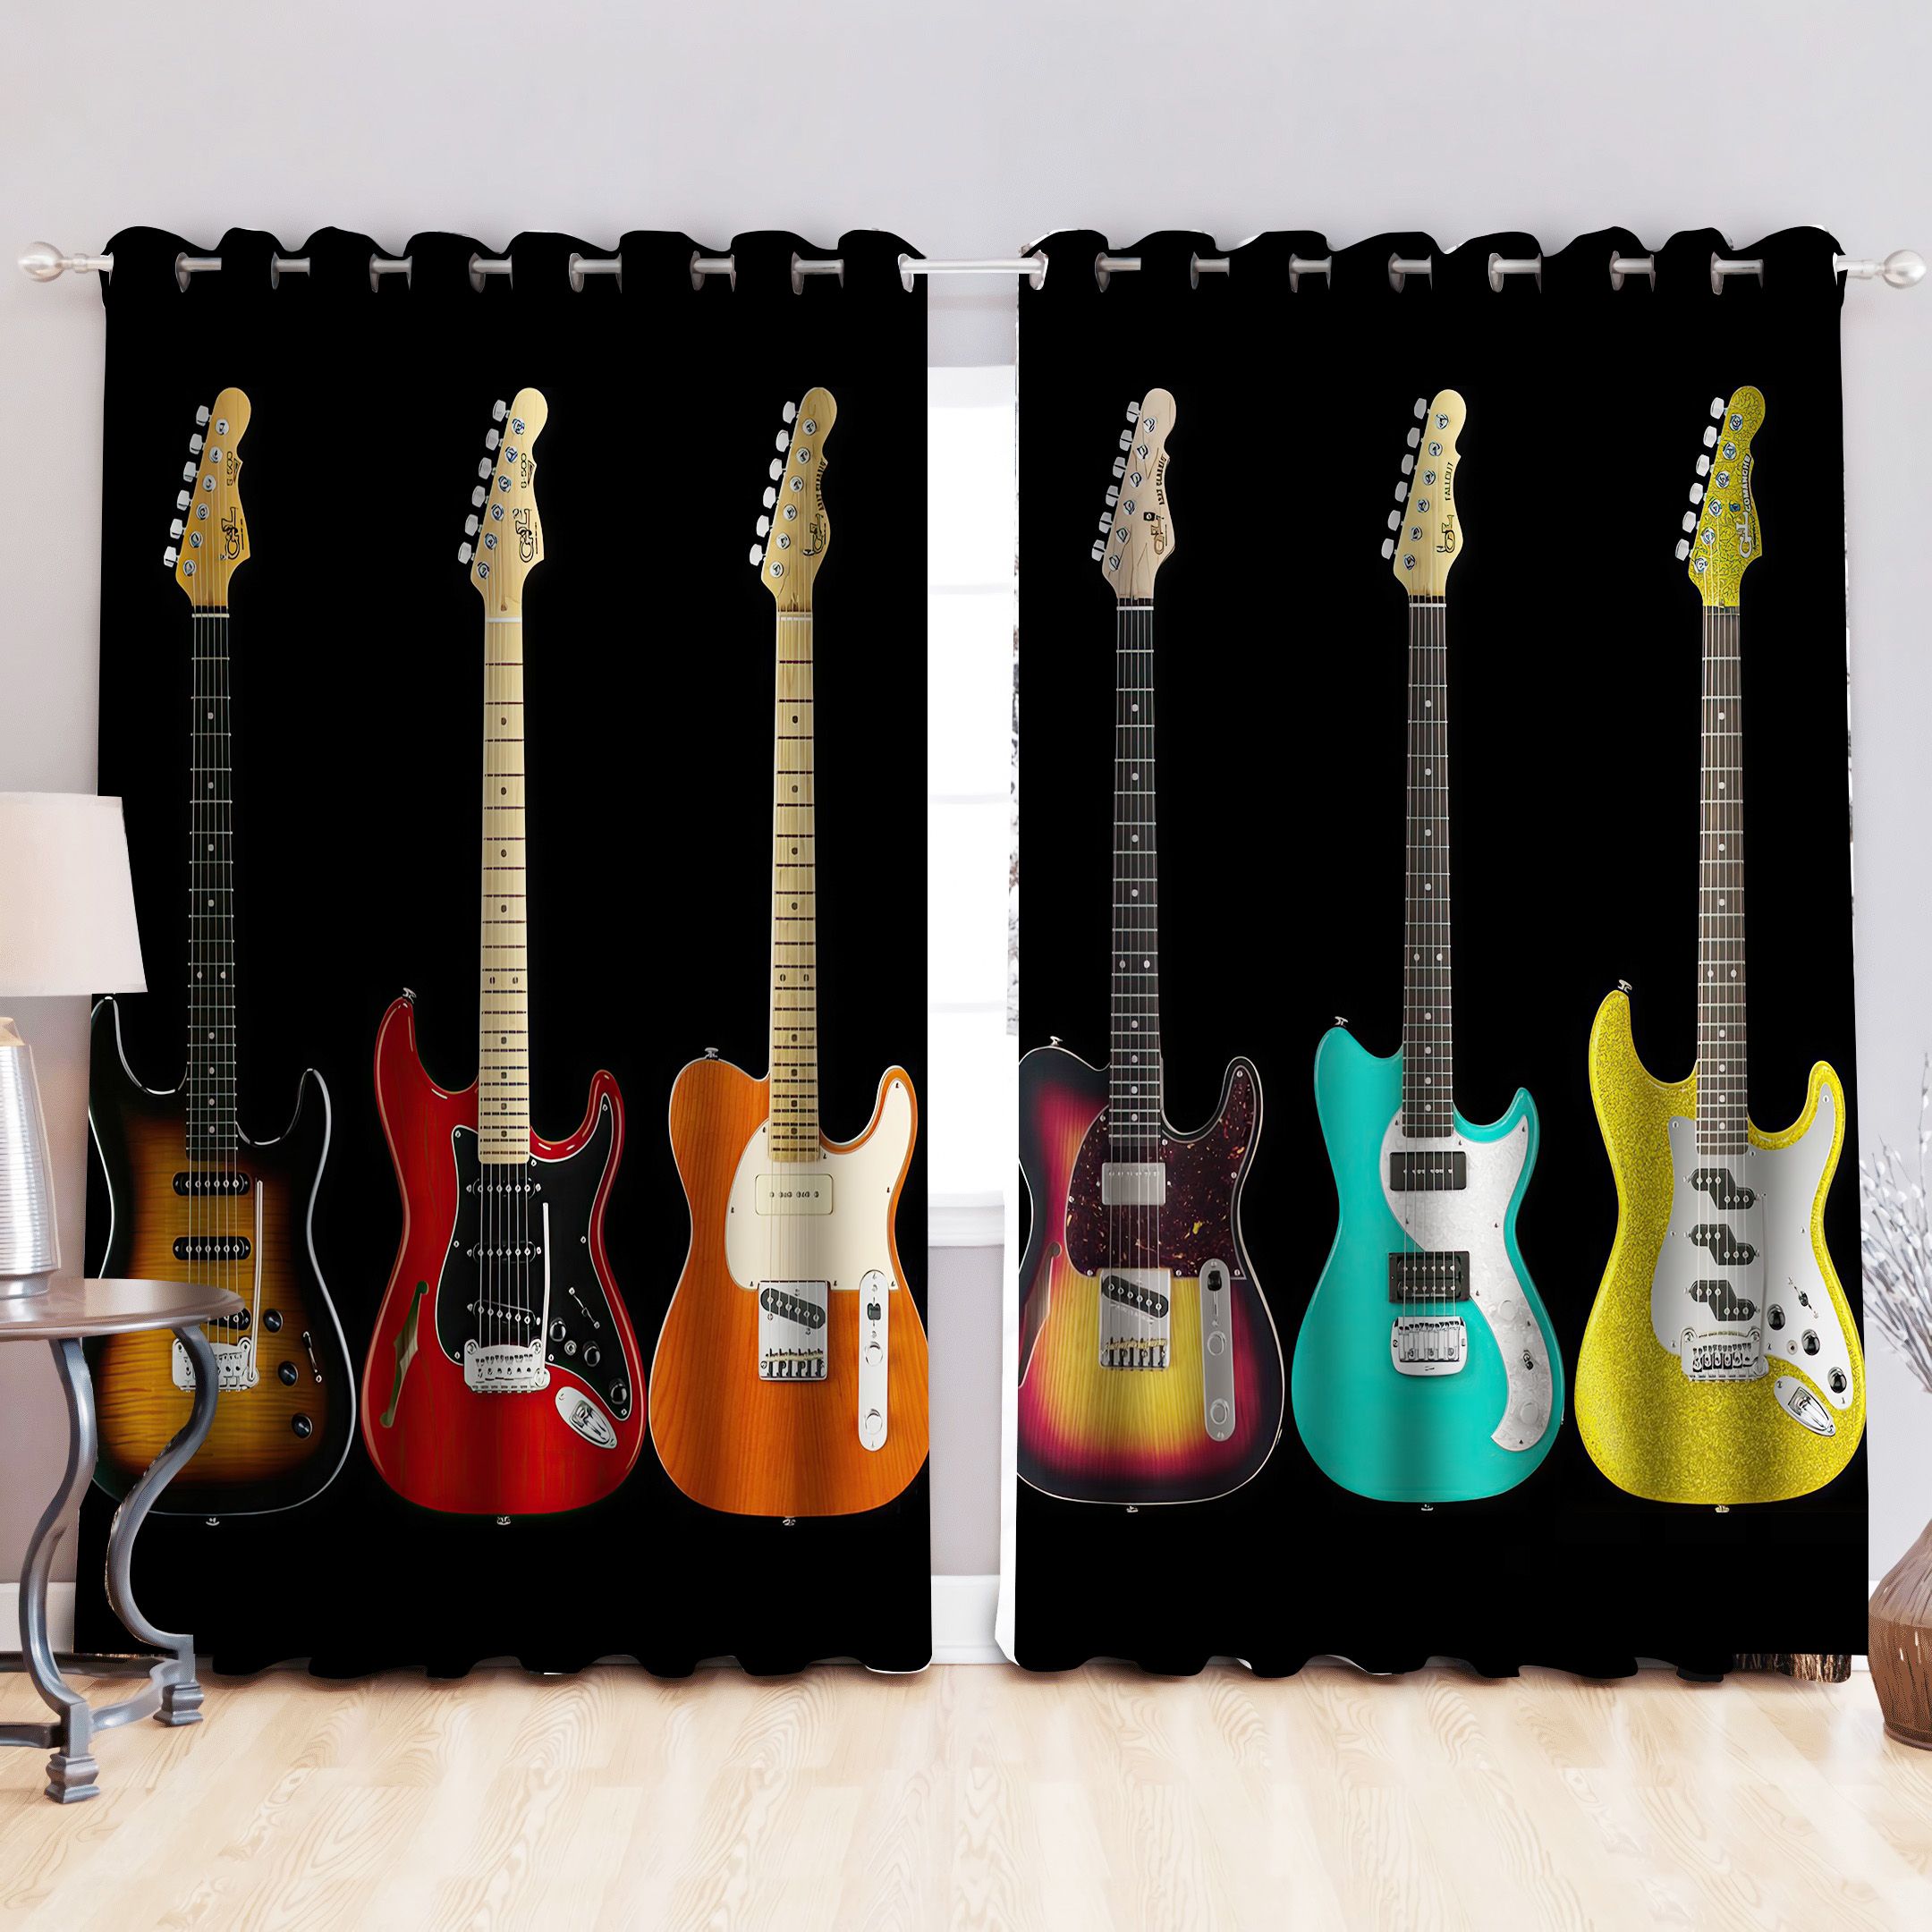 Guitars Never Give Up Printed Window Curtain Home Decor